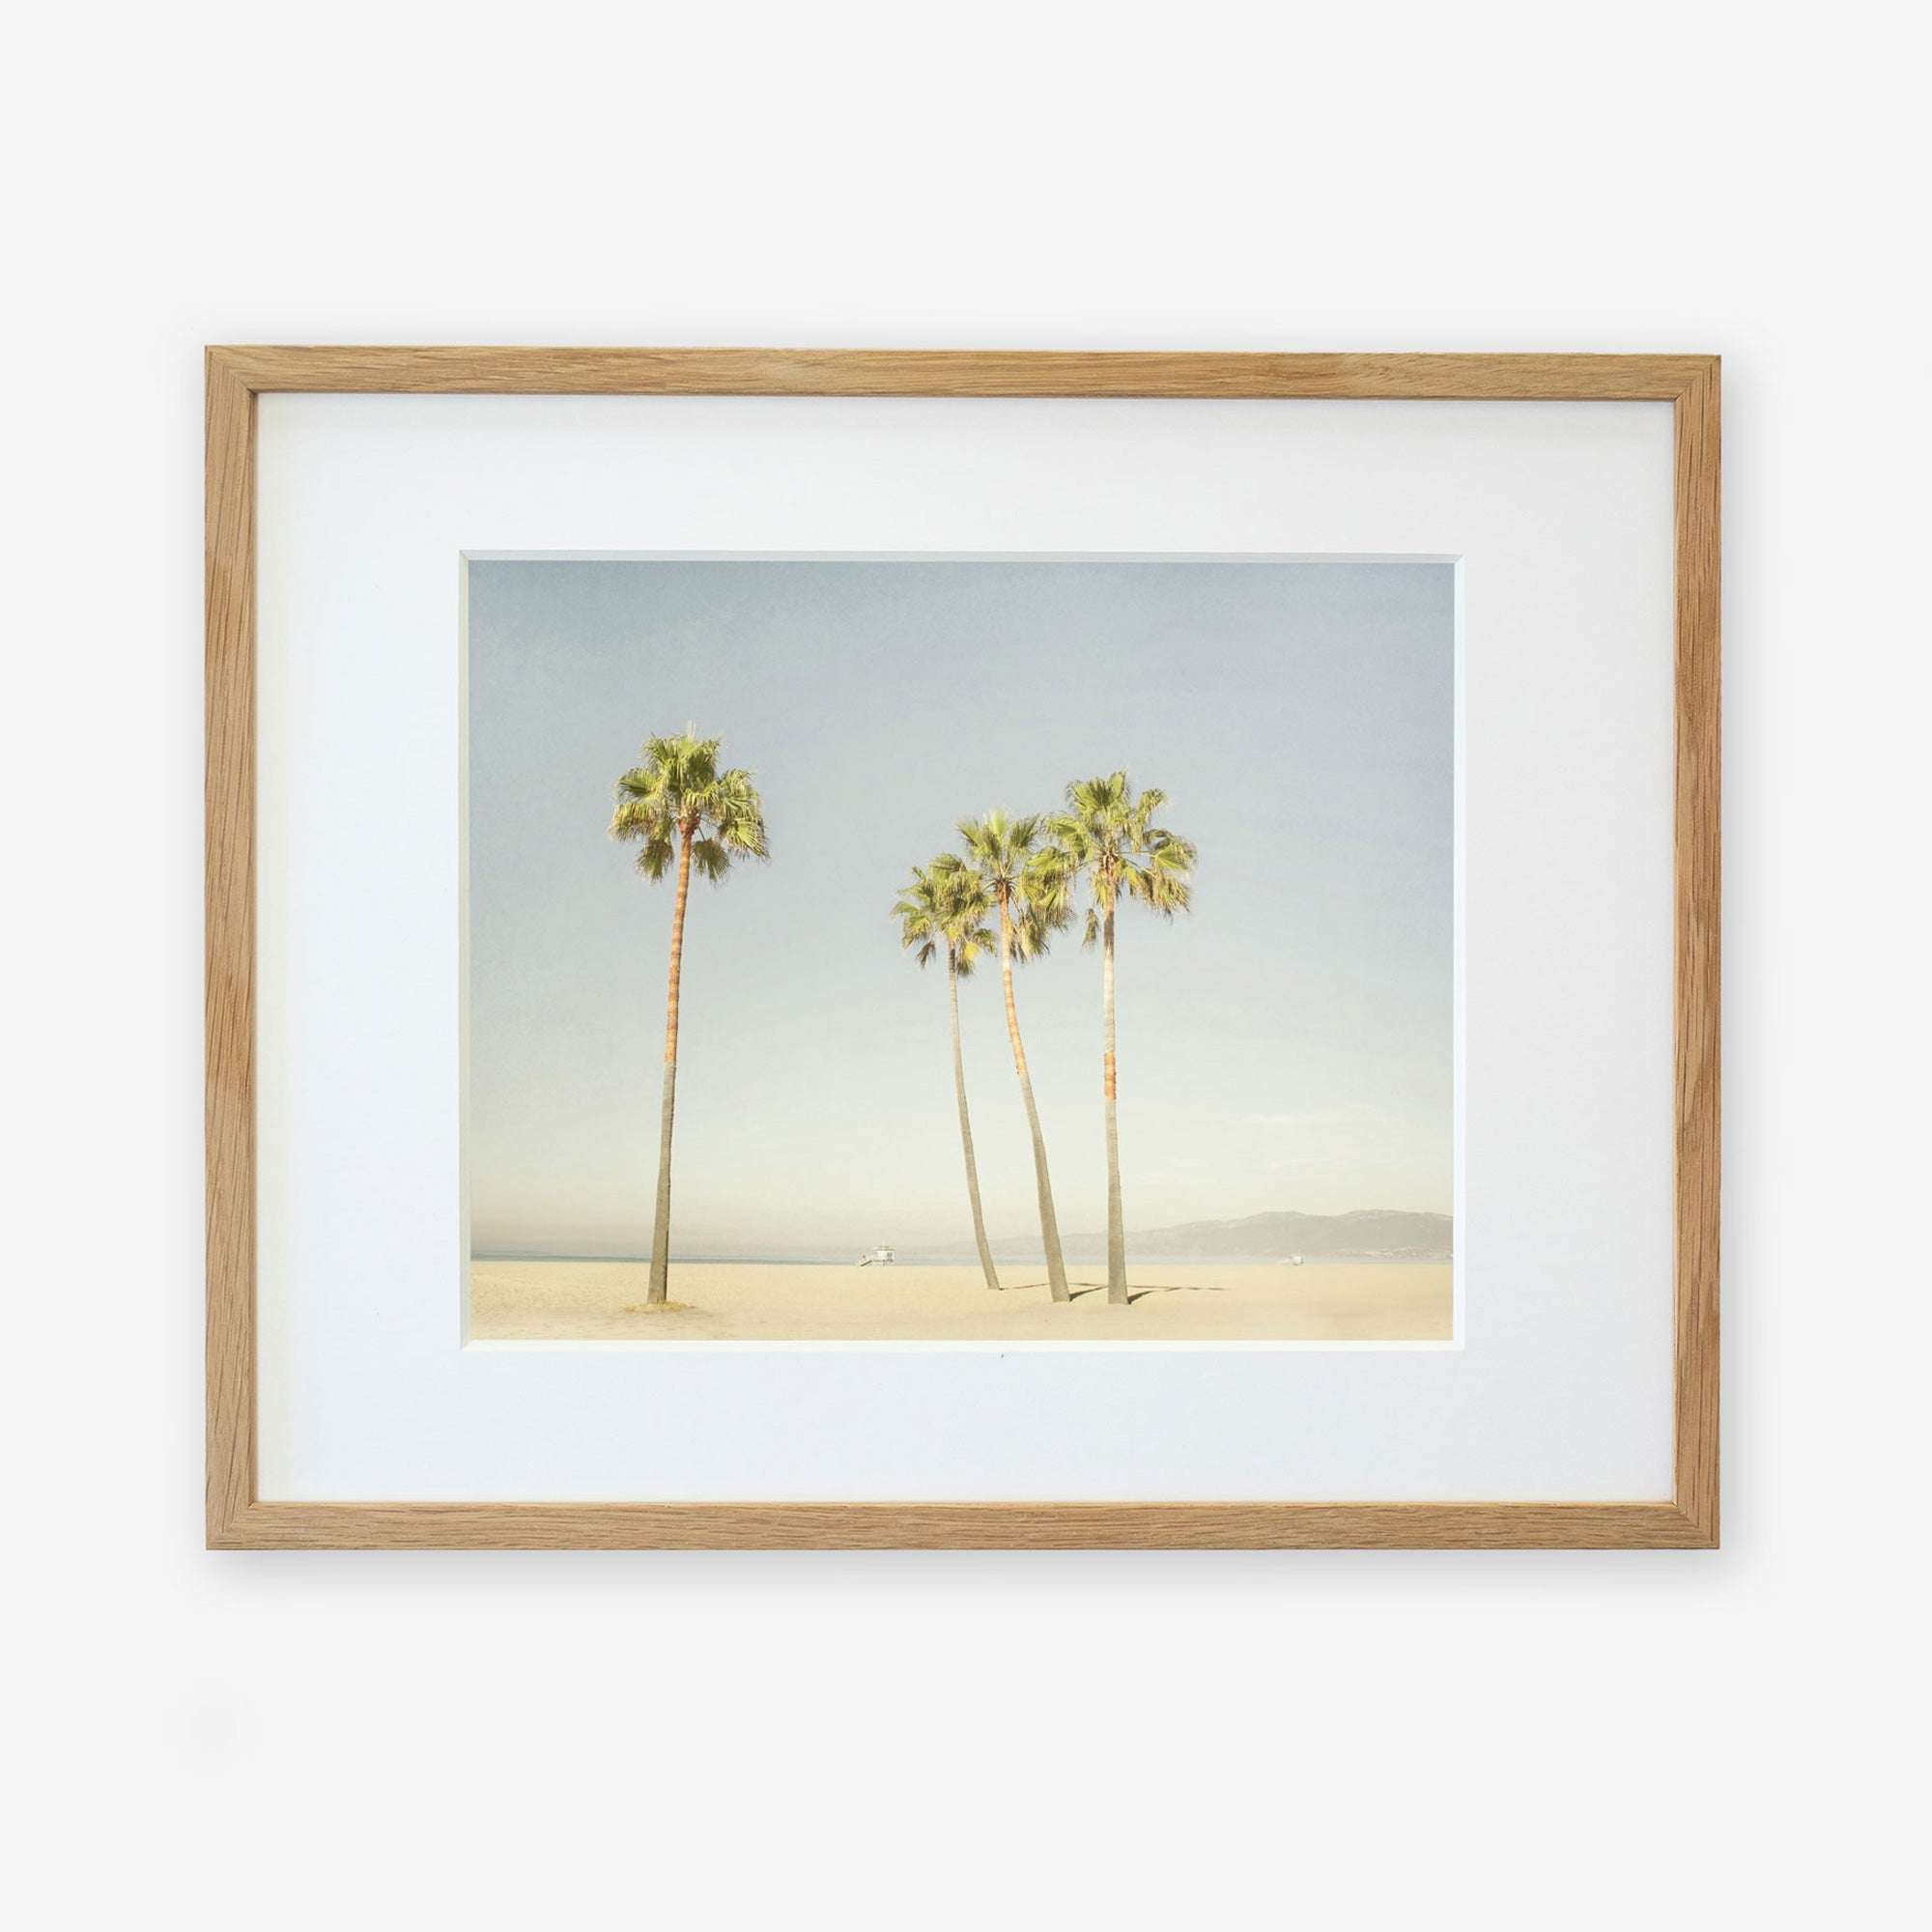 A framed photograph of four palm trees on a sandy beach under a clear sky, printed on archival photographic paper, displayed in a simple wooden frame with a white mat. - Offley Green&#39;s California Venice Beach Print, &#39;Boardwalk Palms&#39;